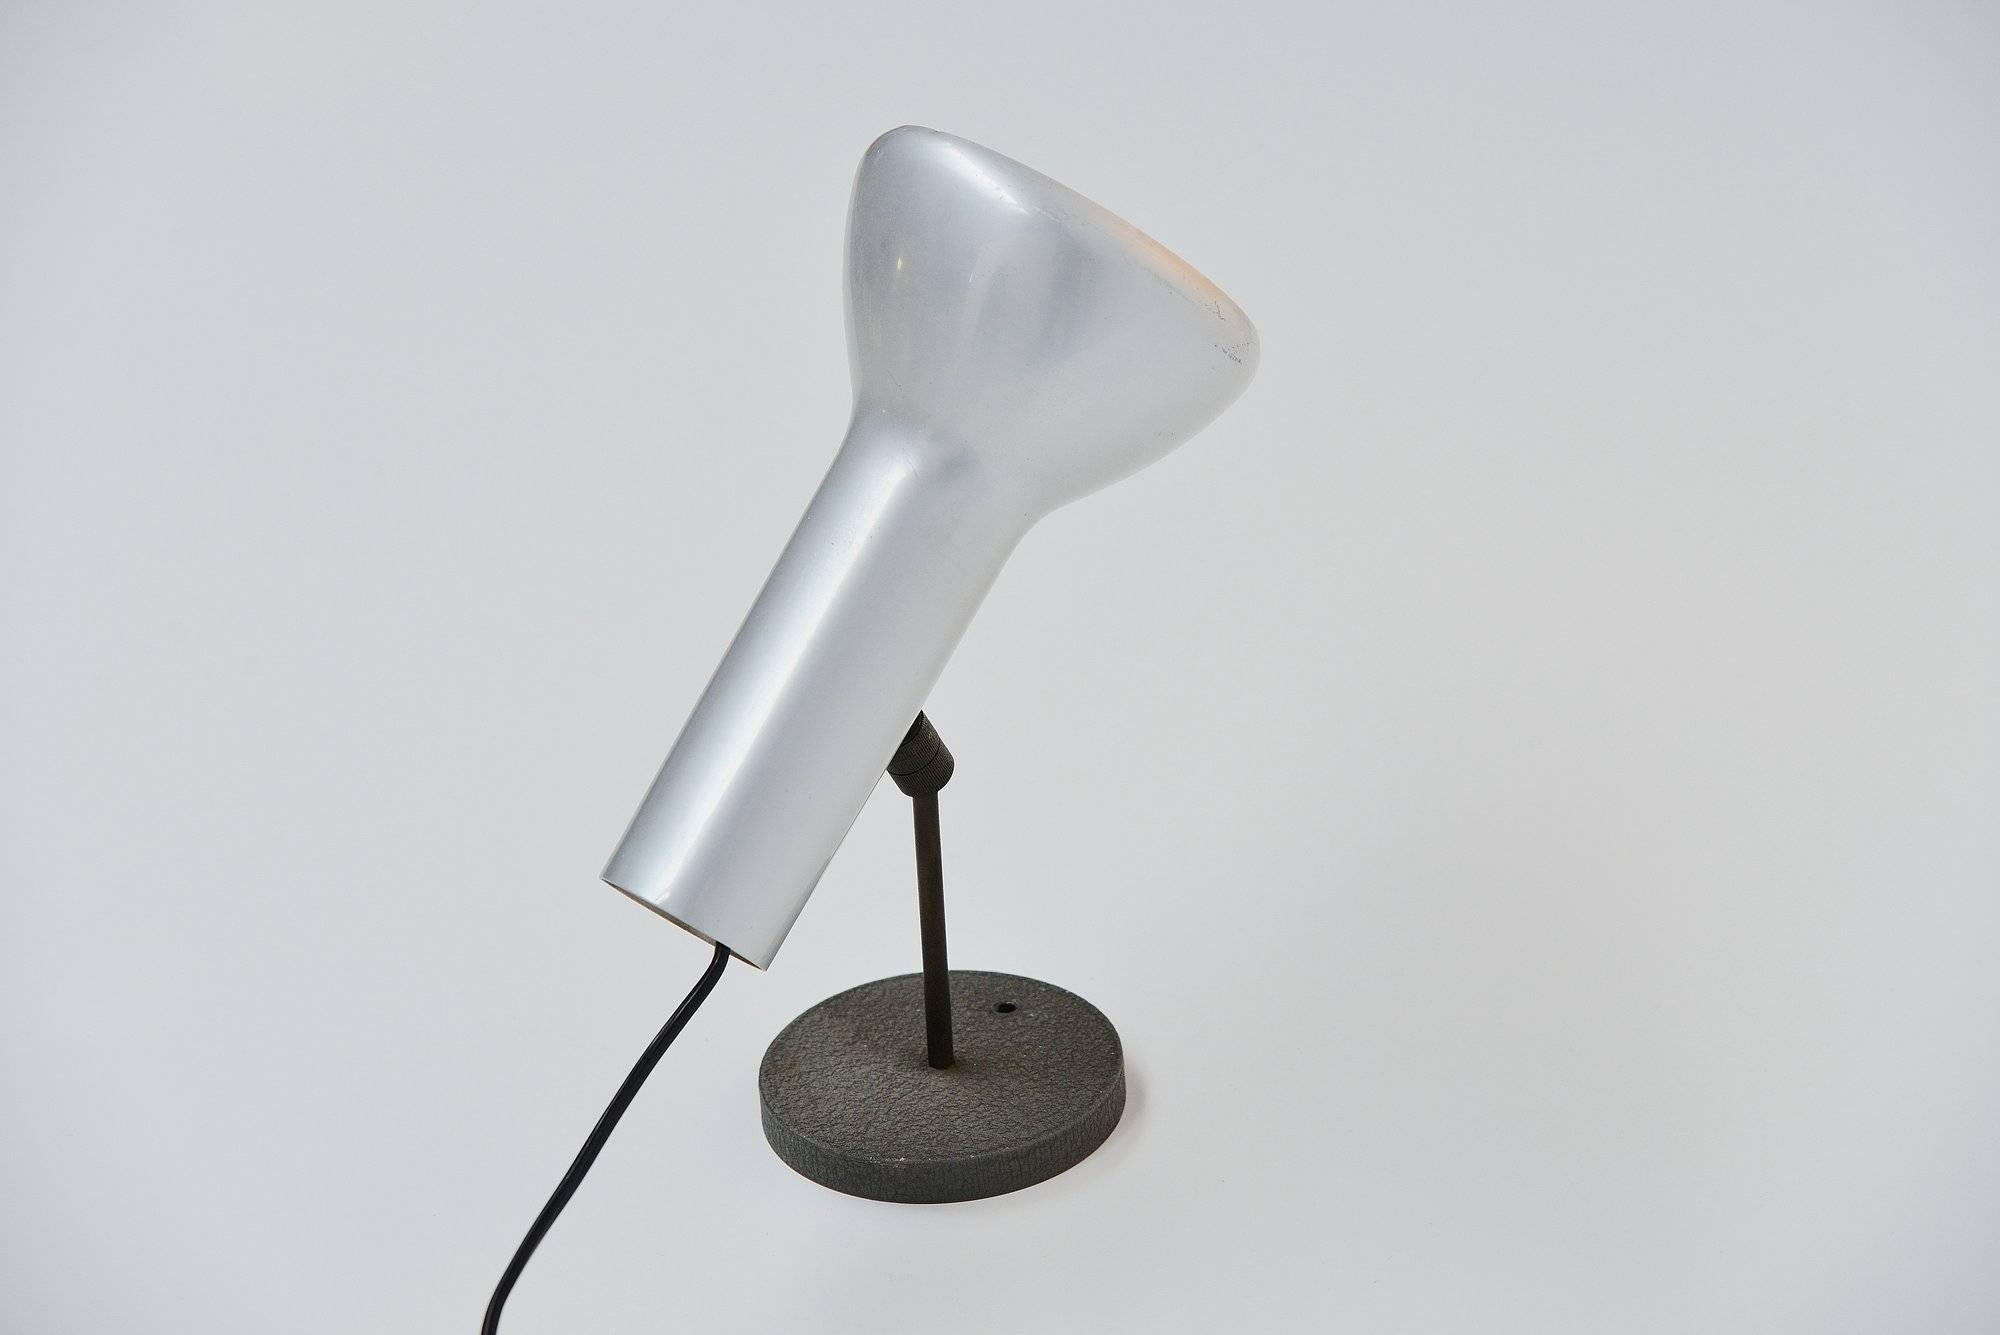 Rare wall/table lamp version of model 7 designed by Gino Sarfatti, manufactured by Arteluce, Italy 1957. I have never seen this fairly unique version before. This is the table version of model 7 which is only documented as wall version in the book.